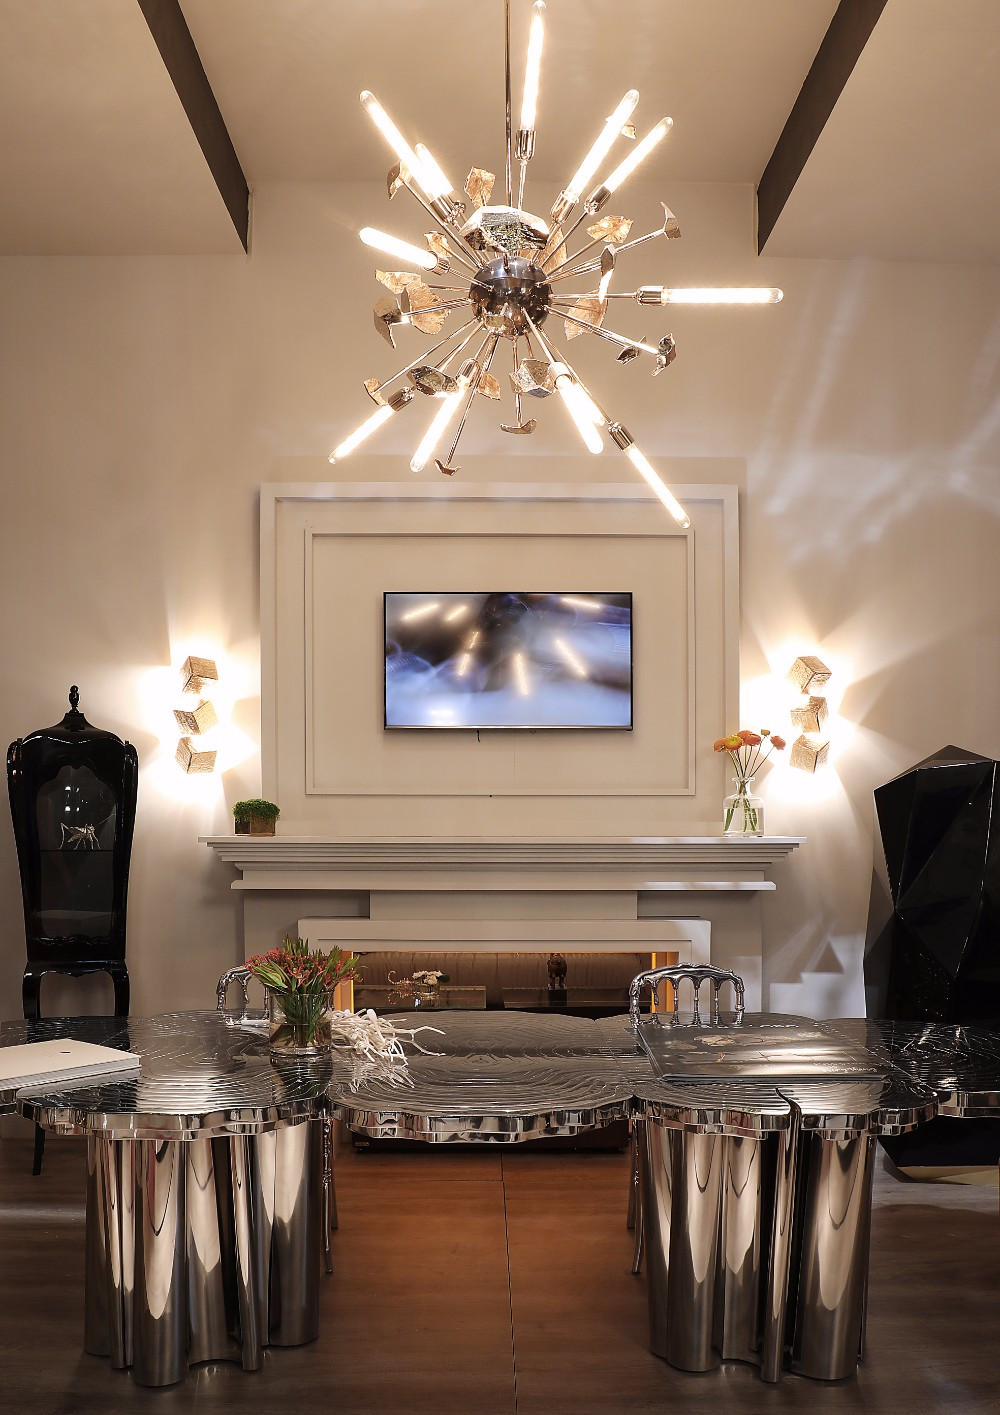 Modern Living Room Chandeliers
 Top 10 Chandeliers for Your Living Room Decor